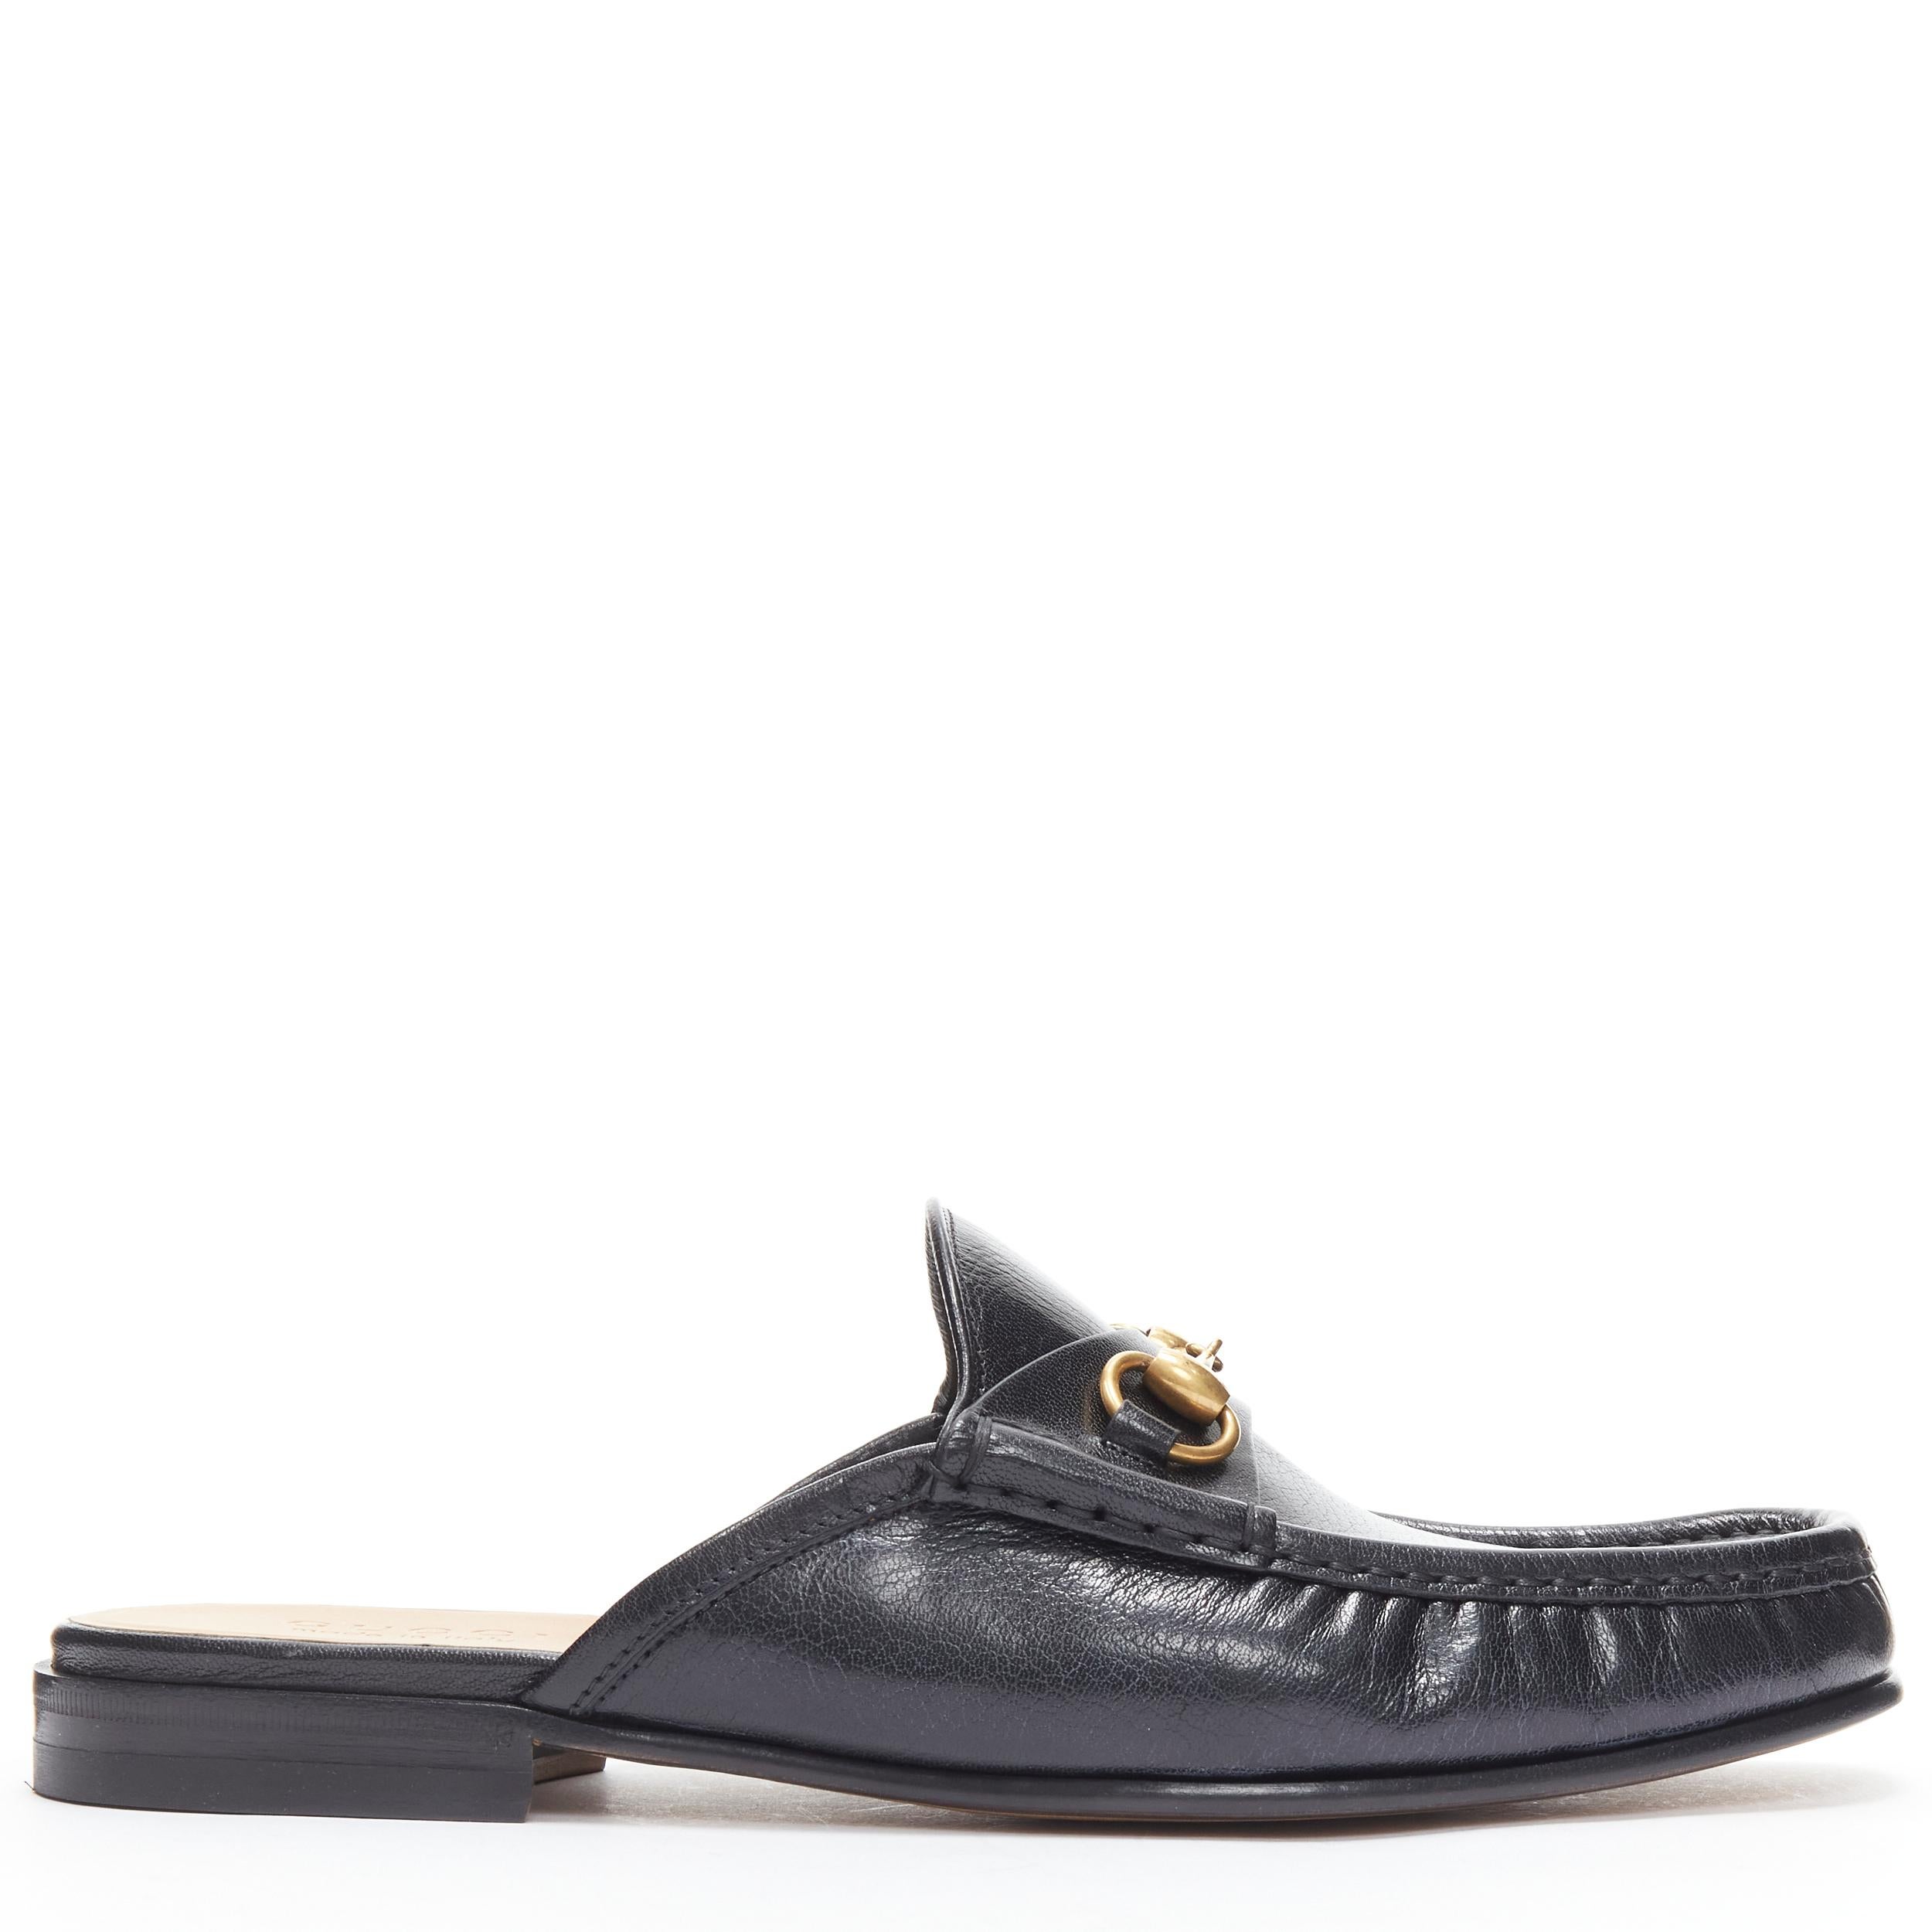 new GUCCI Quentin Nero black leather gold Horsebit slip on loafer UK8.5 US9.5 EU42.5 
Reference: TGAS/B02135 
Brand: Gucci 
Designer: Alessandro Michele 
Model: Quentin 
Material: Leather 
Color: Black 
Pattern: Solid 
Extra Detail: Quentin. Black